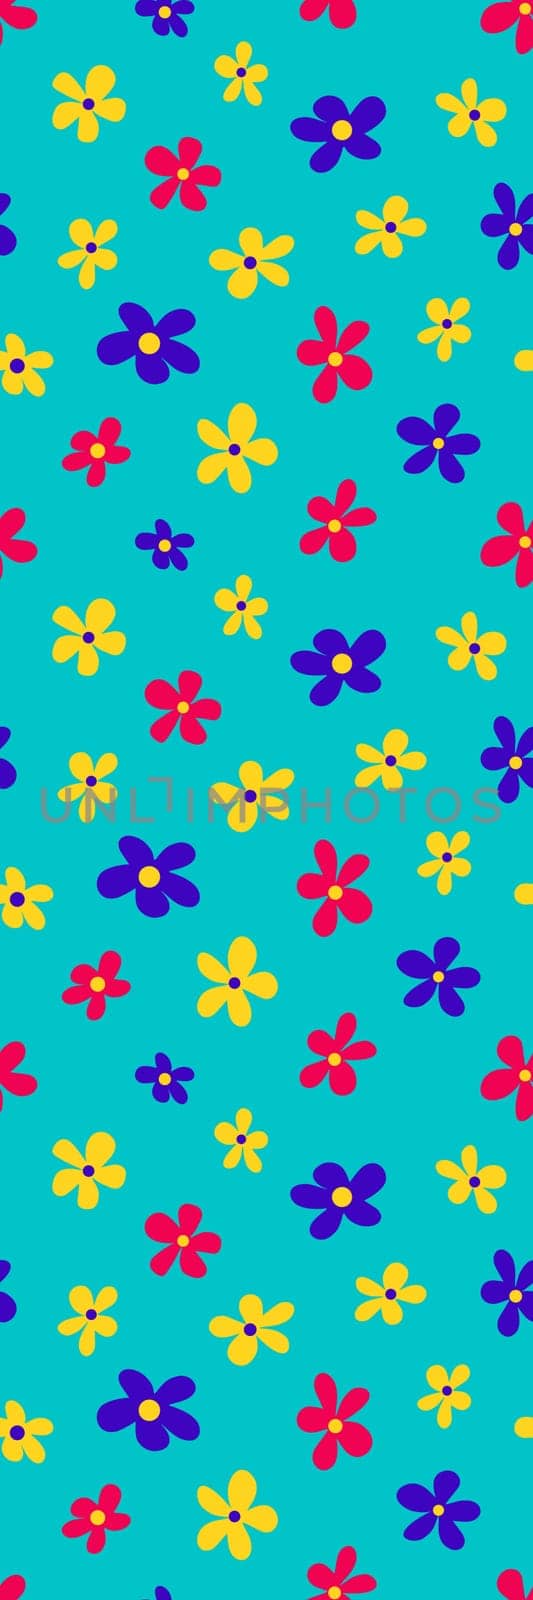 Blue bookmark with colorful funny Floral pattern